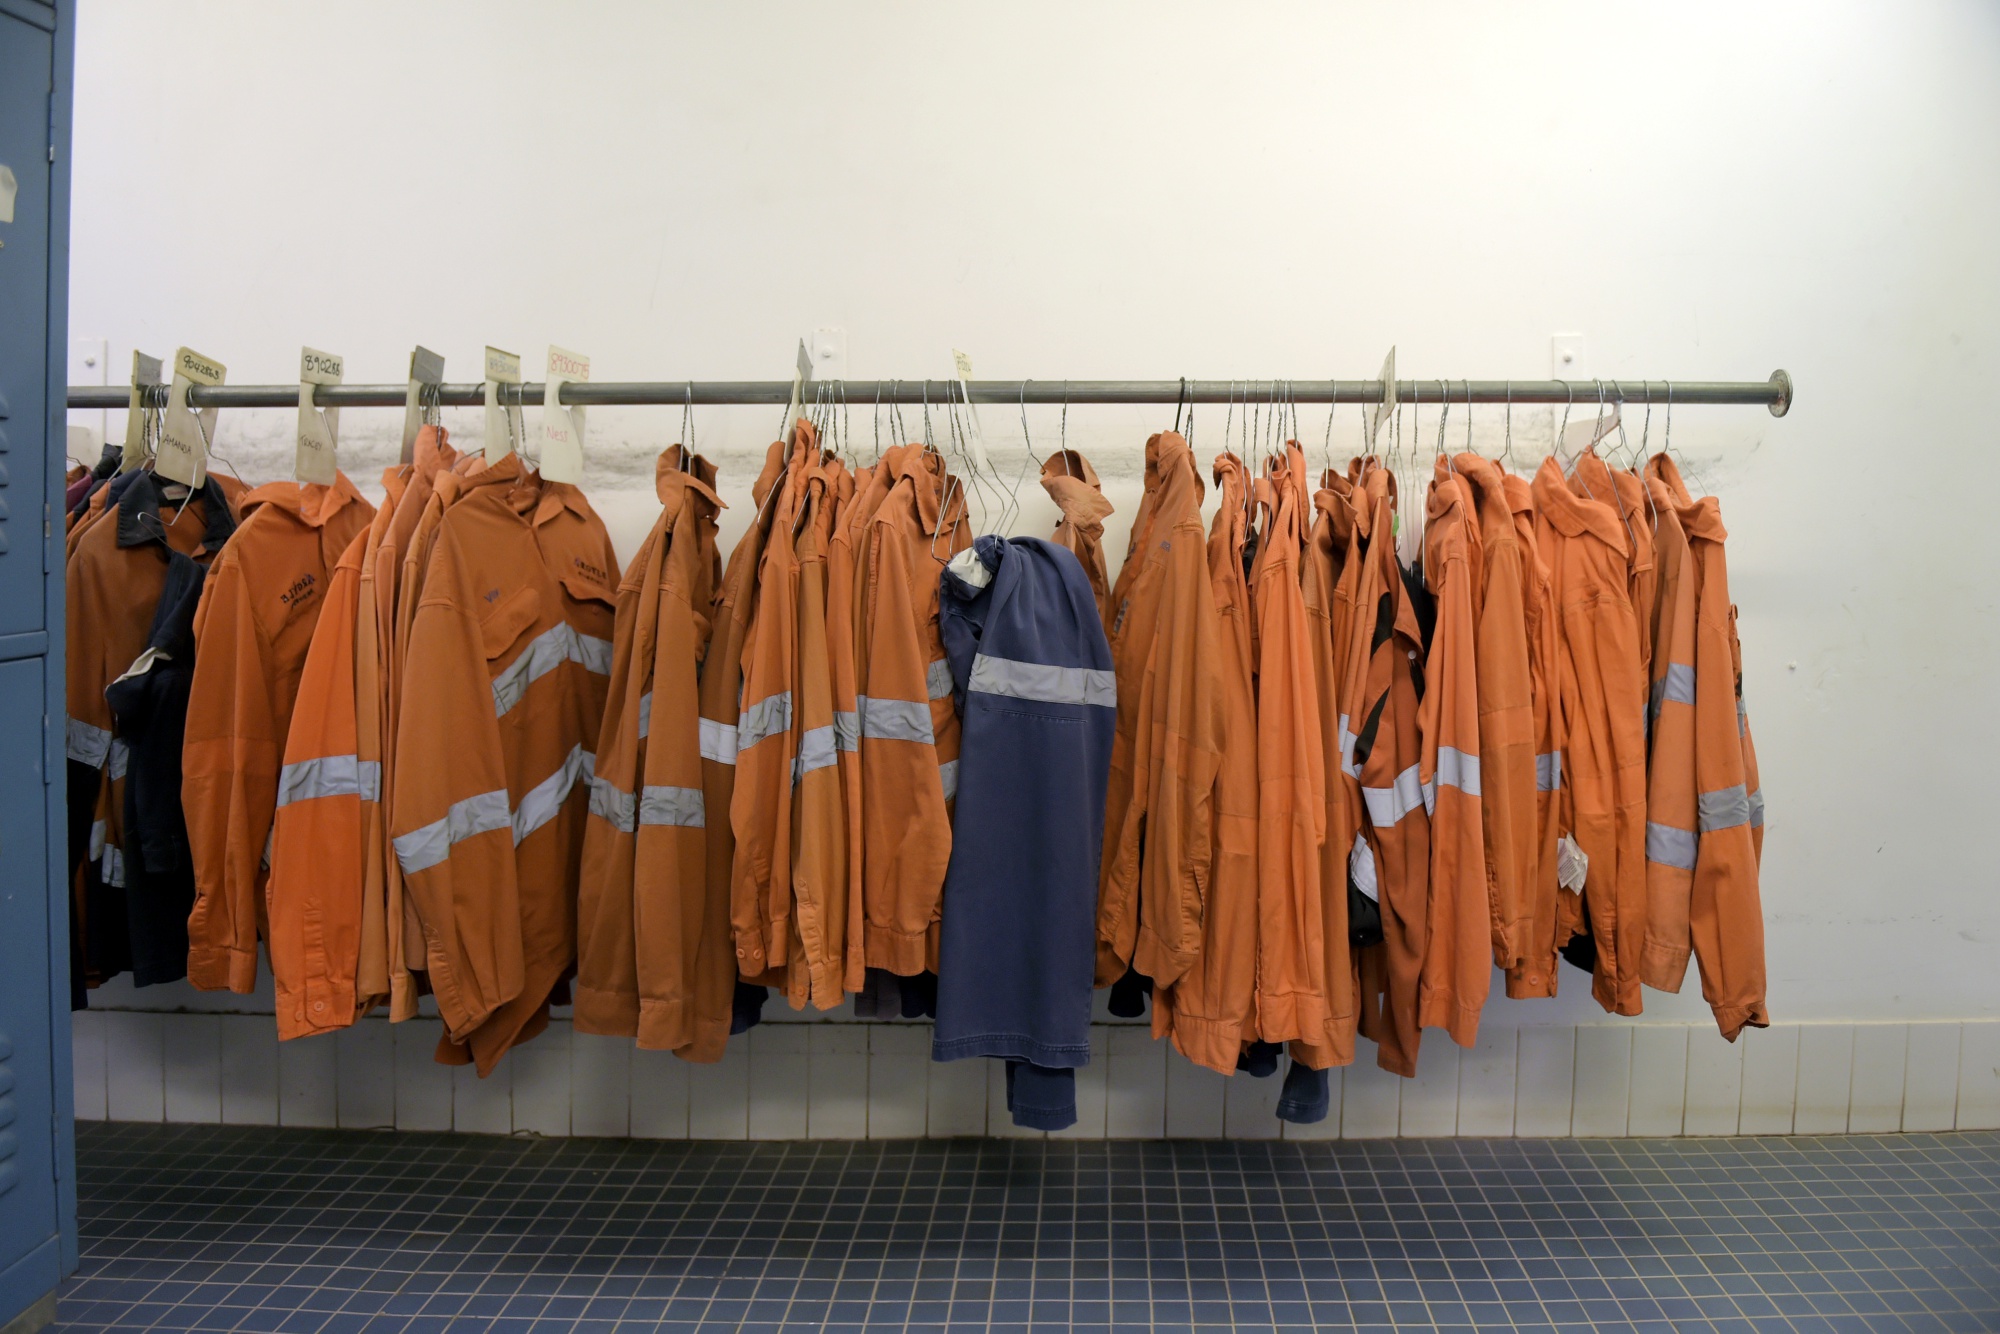 Working clothes hang in a changing room at the Argyle diamond mine operated by the Rio Tinto Group in Western Australia.